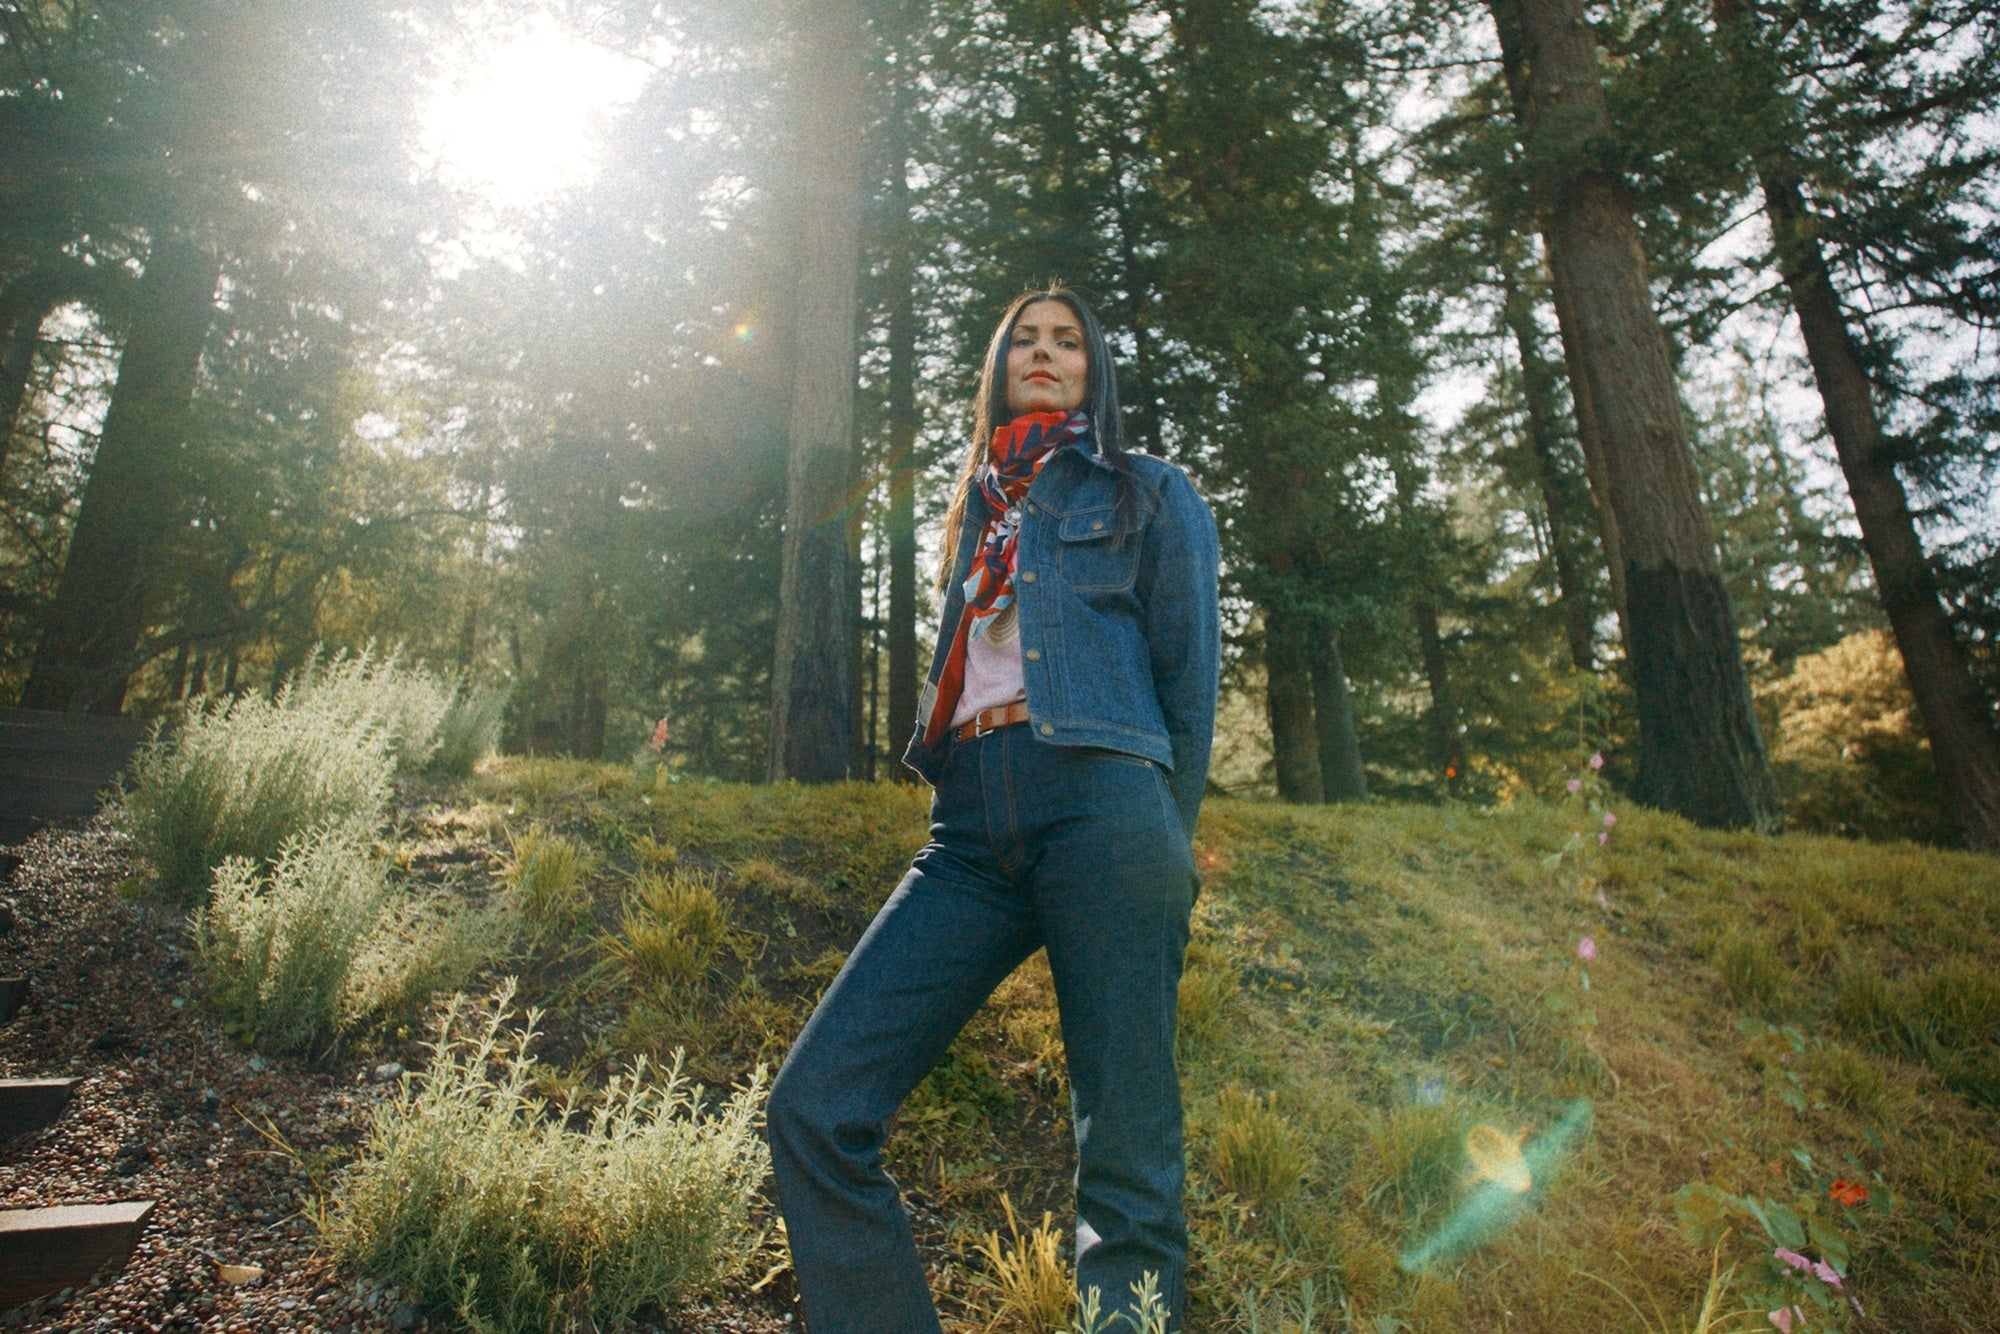 Selvedge denim jeans and coat made in USA on Native American model standing in woods